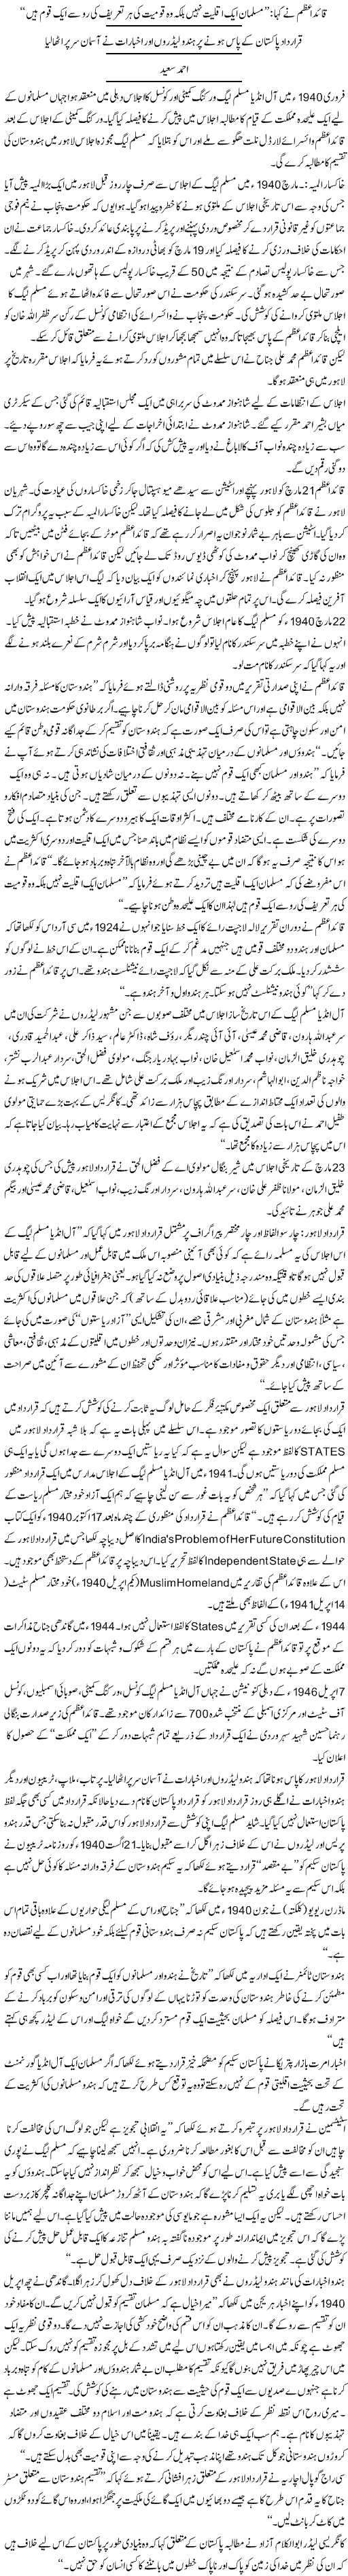 history about 23rd March 1940 Pakistan Resolution in Urdu